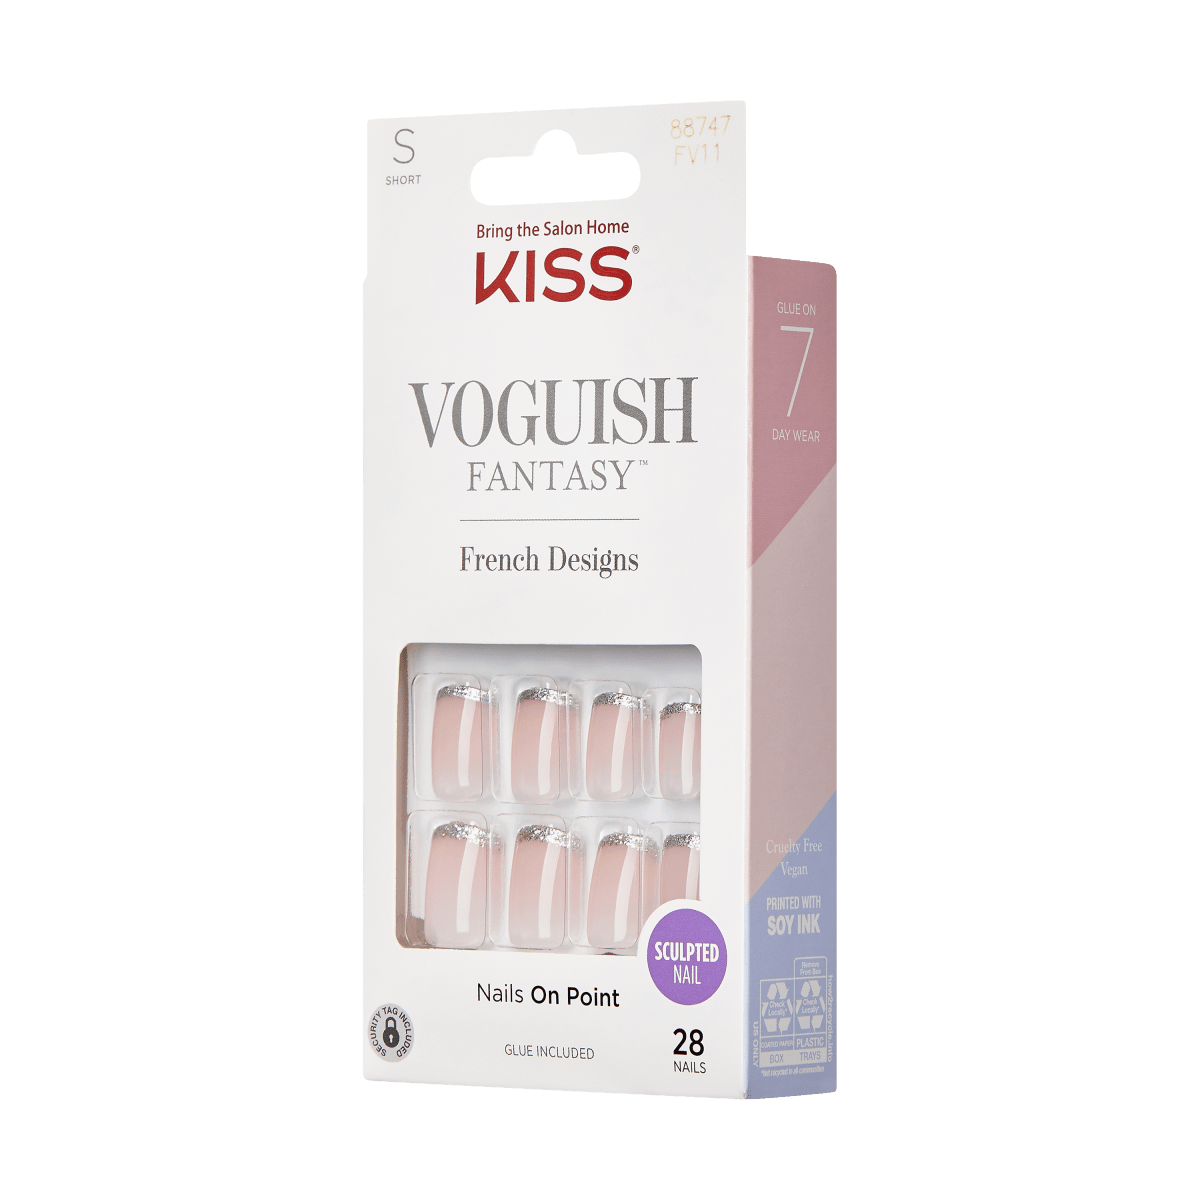 KISS Voguish Fantasy French - Bisous